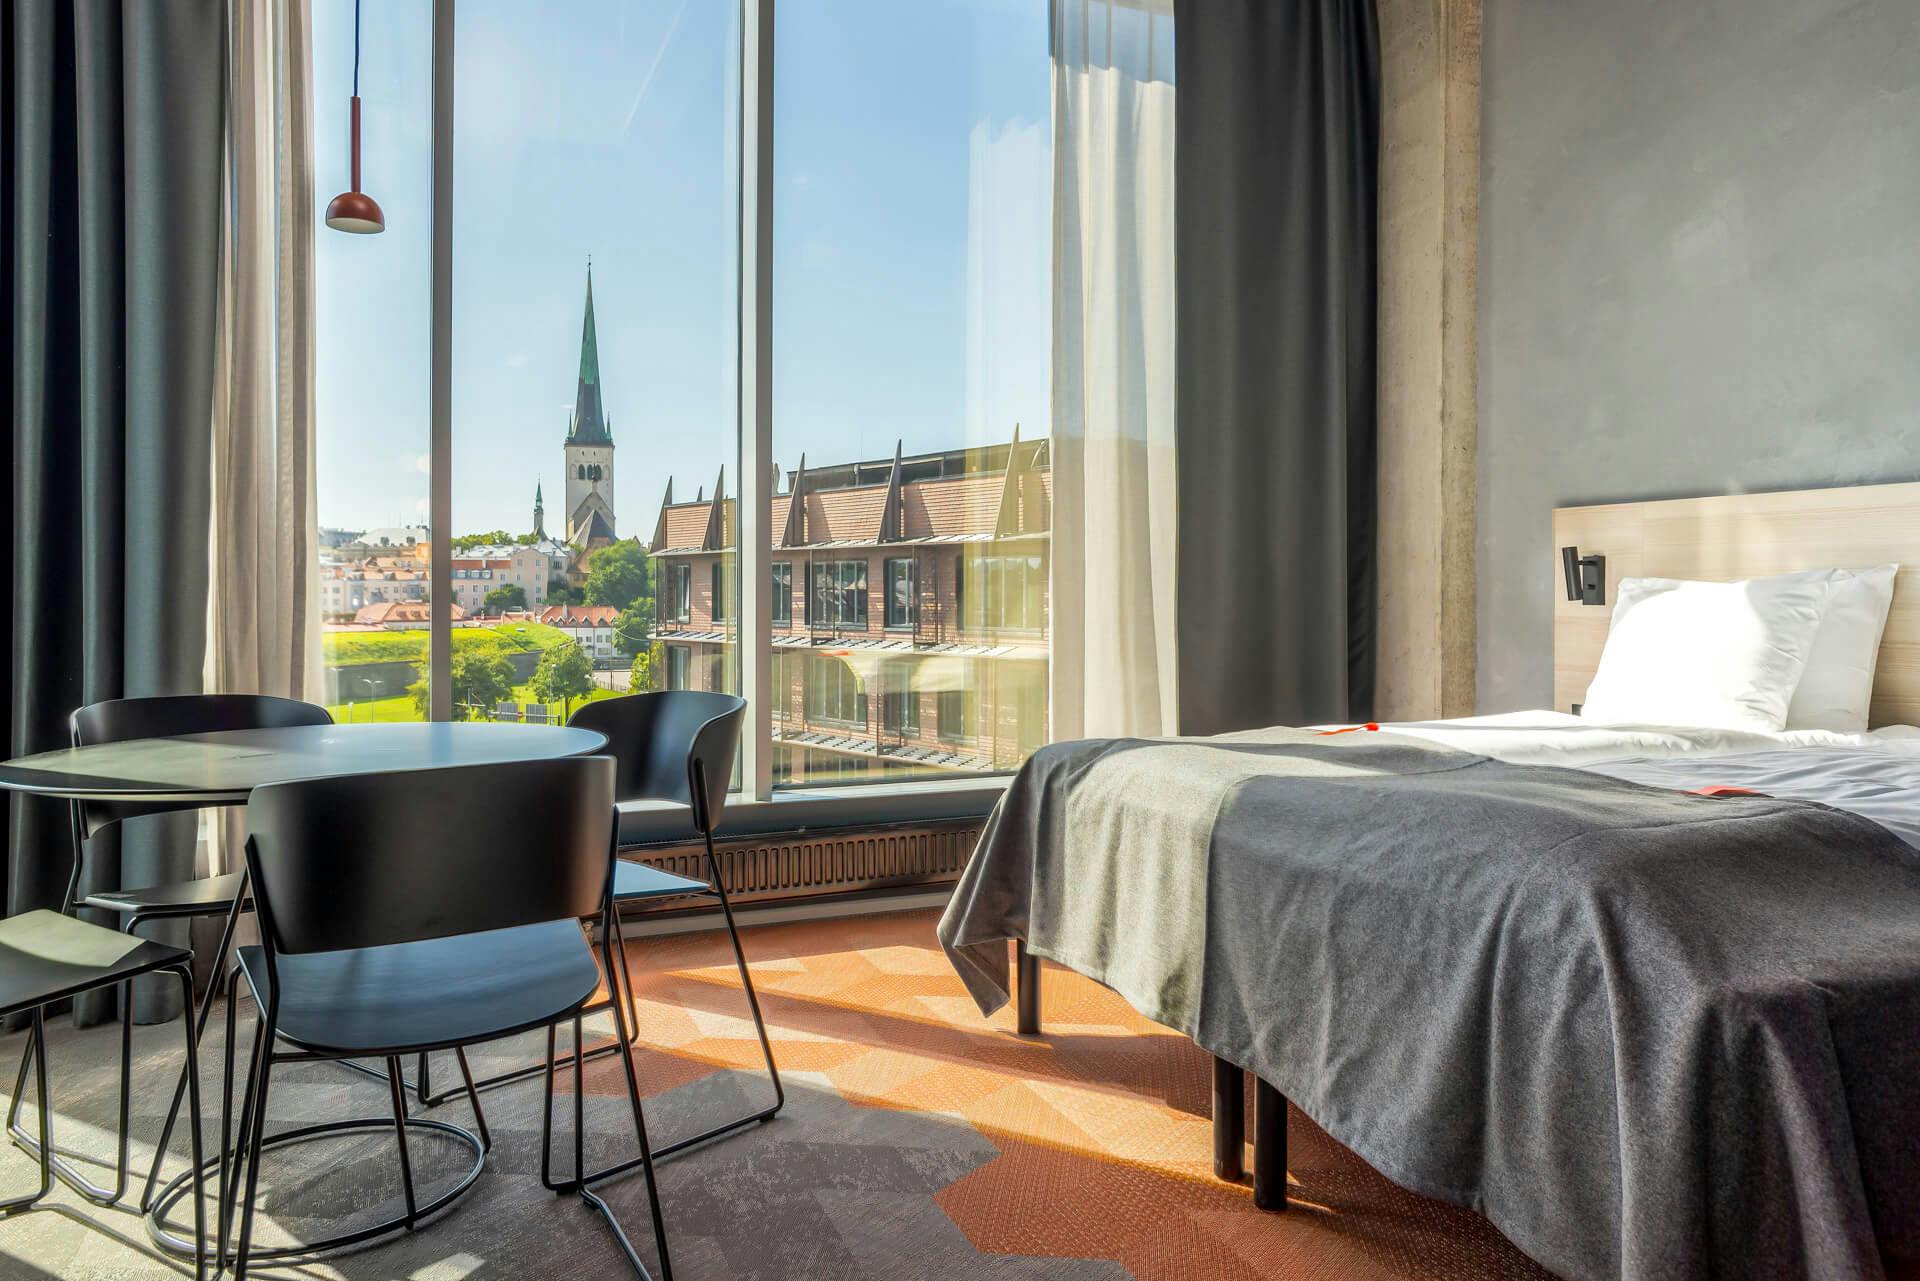 Double bed, seating area, big windows with view over the old town